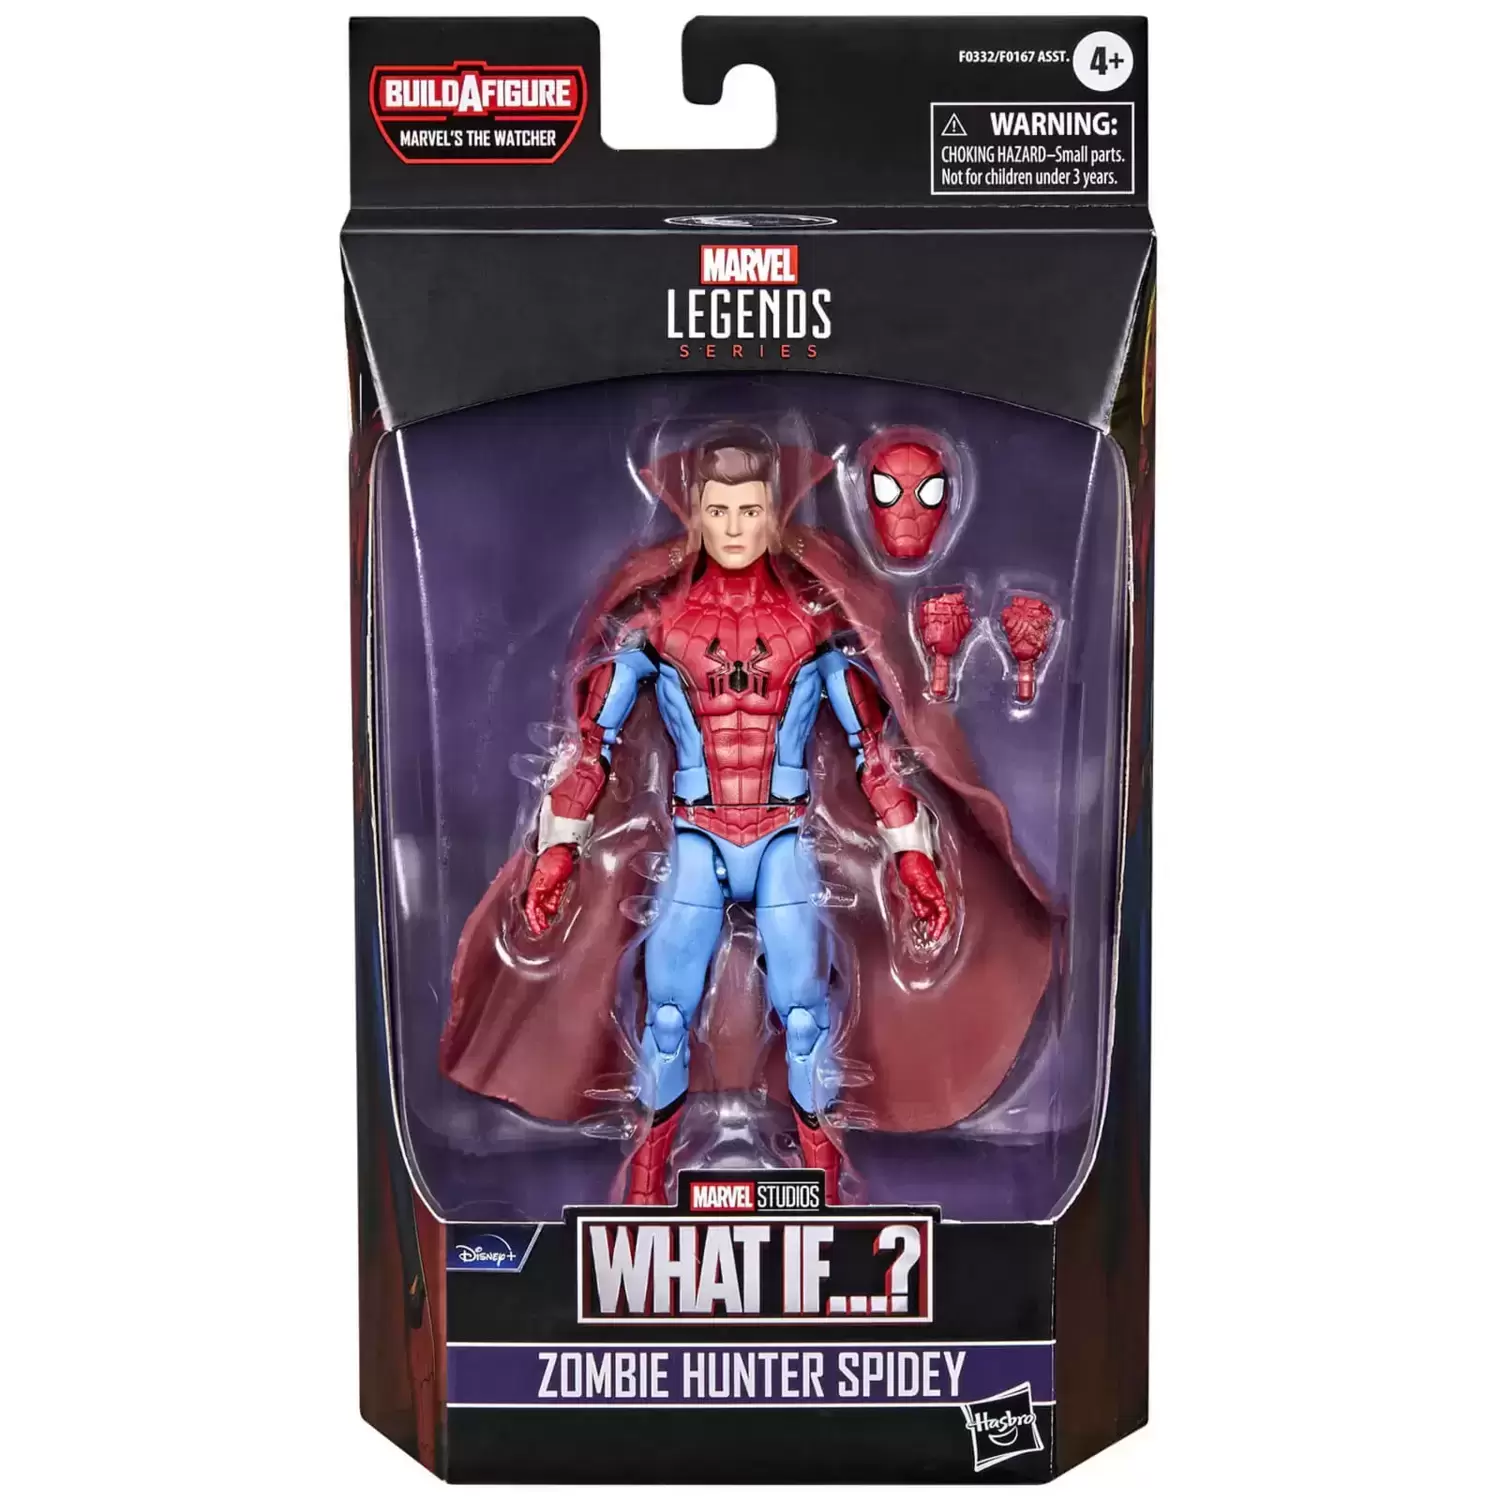 MARVEL Spider-Man Legends Series 6-inch Collectible Action Figure Velocity  Suit Toy, Build-A-Figure Piece - Spider-Man Legends Series 6-inch  Collectible Action Figure Velocity Suit Toy, Build-A-Figure Piece . Buy  Velocity Suit toys in